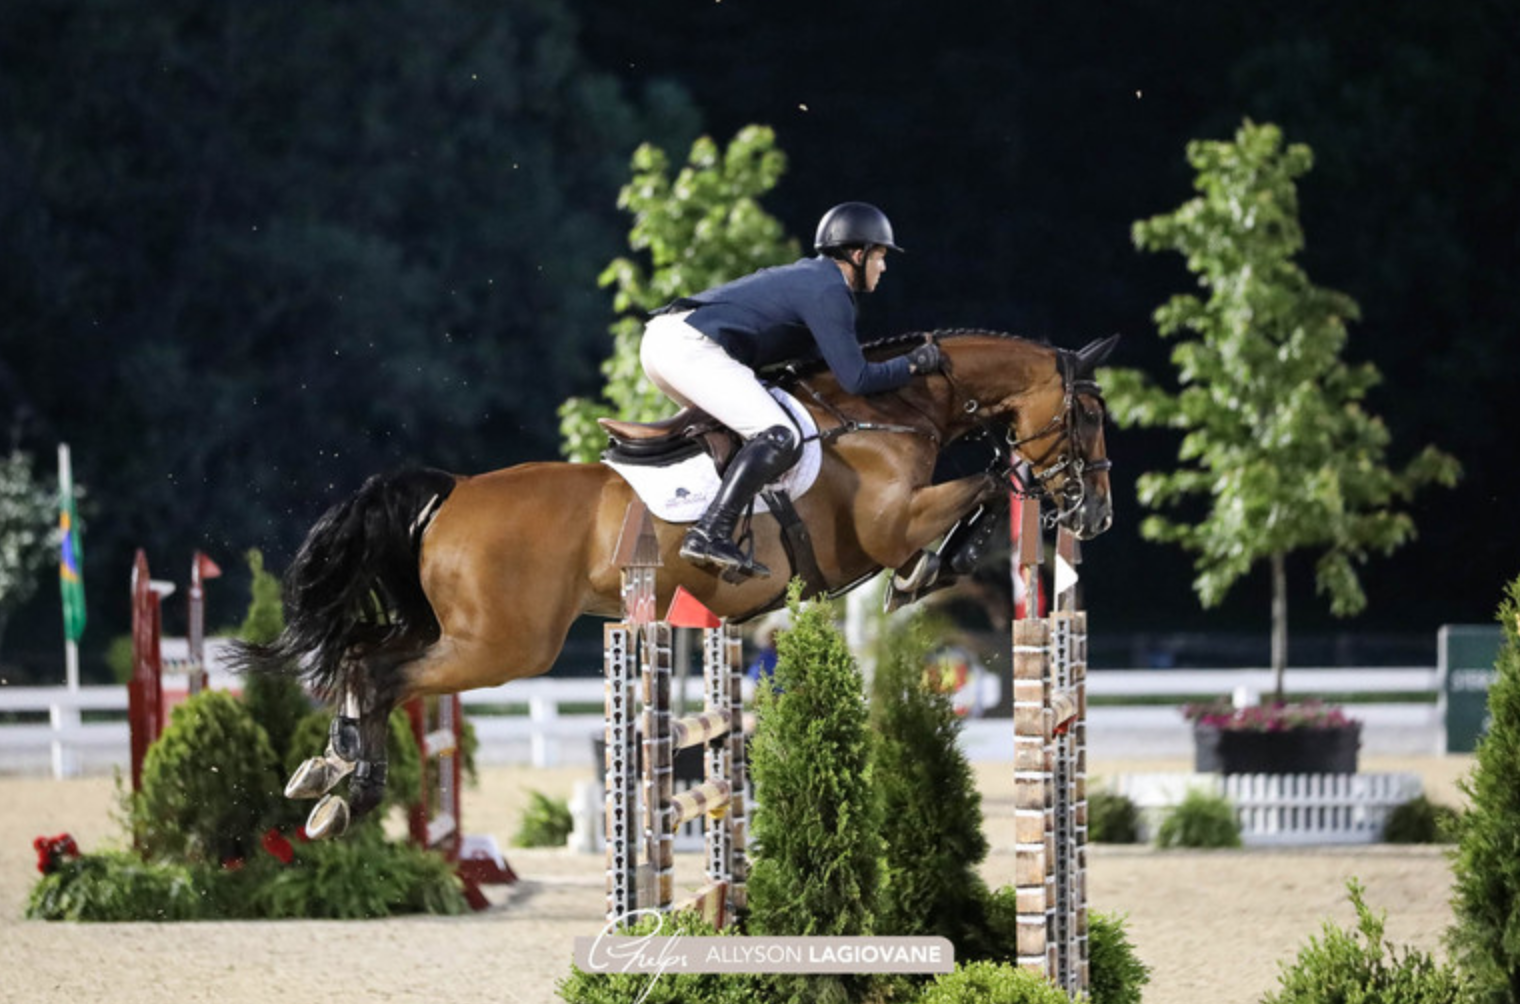 Shane Sweetnam leaves all competition behind in CSI3* 1m45 Kentucky